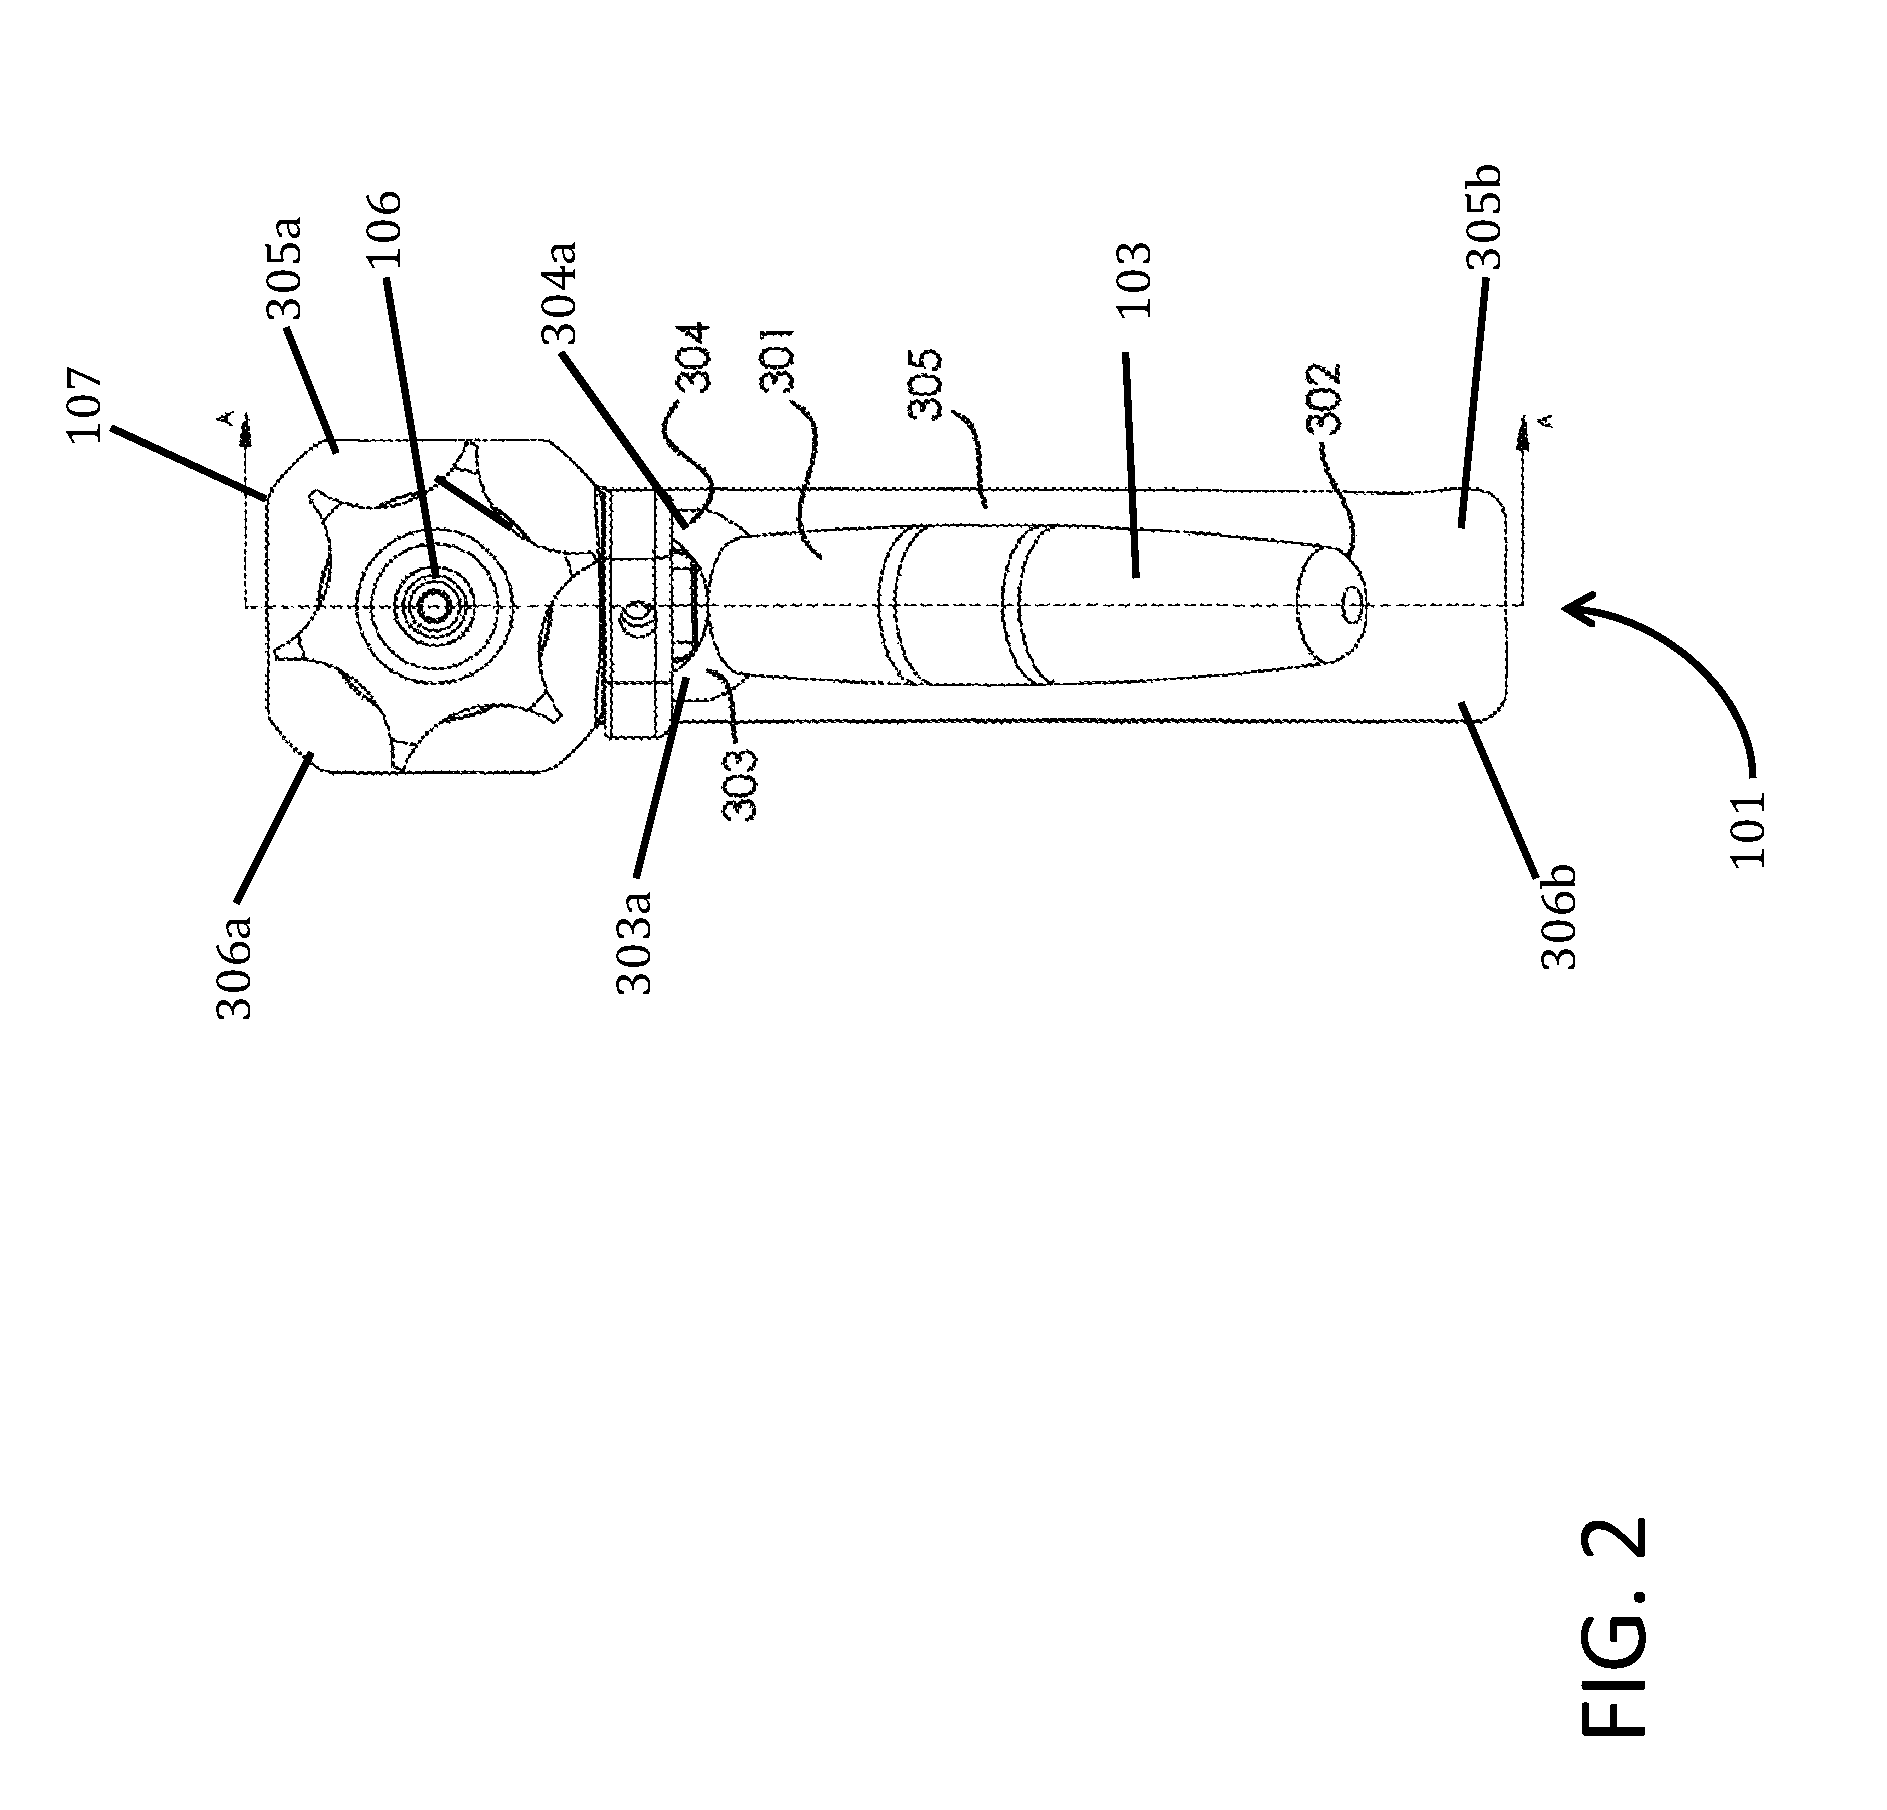 Hermetic rotating handle assembly for a surgical clip applier for laparoscopic procedures